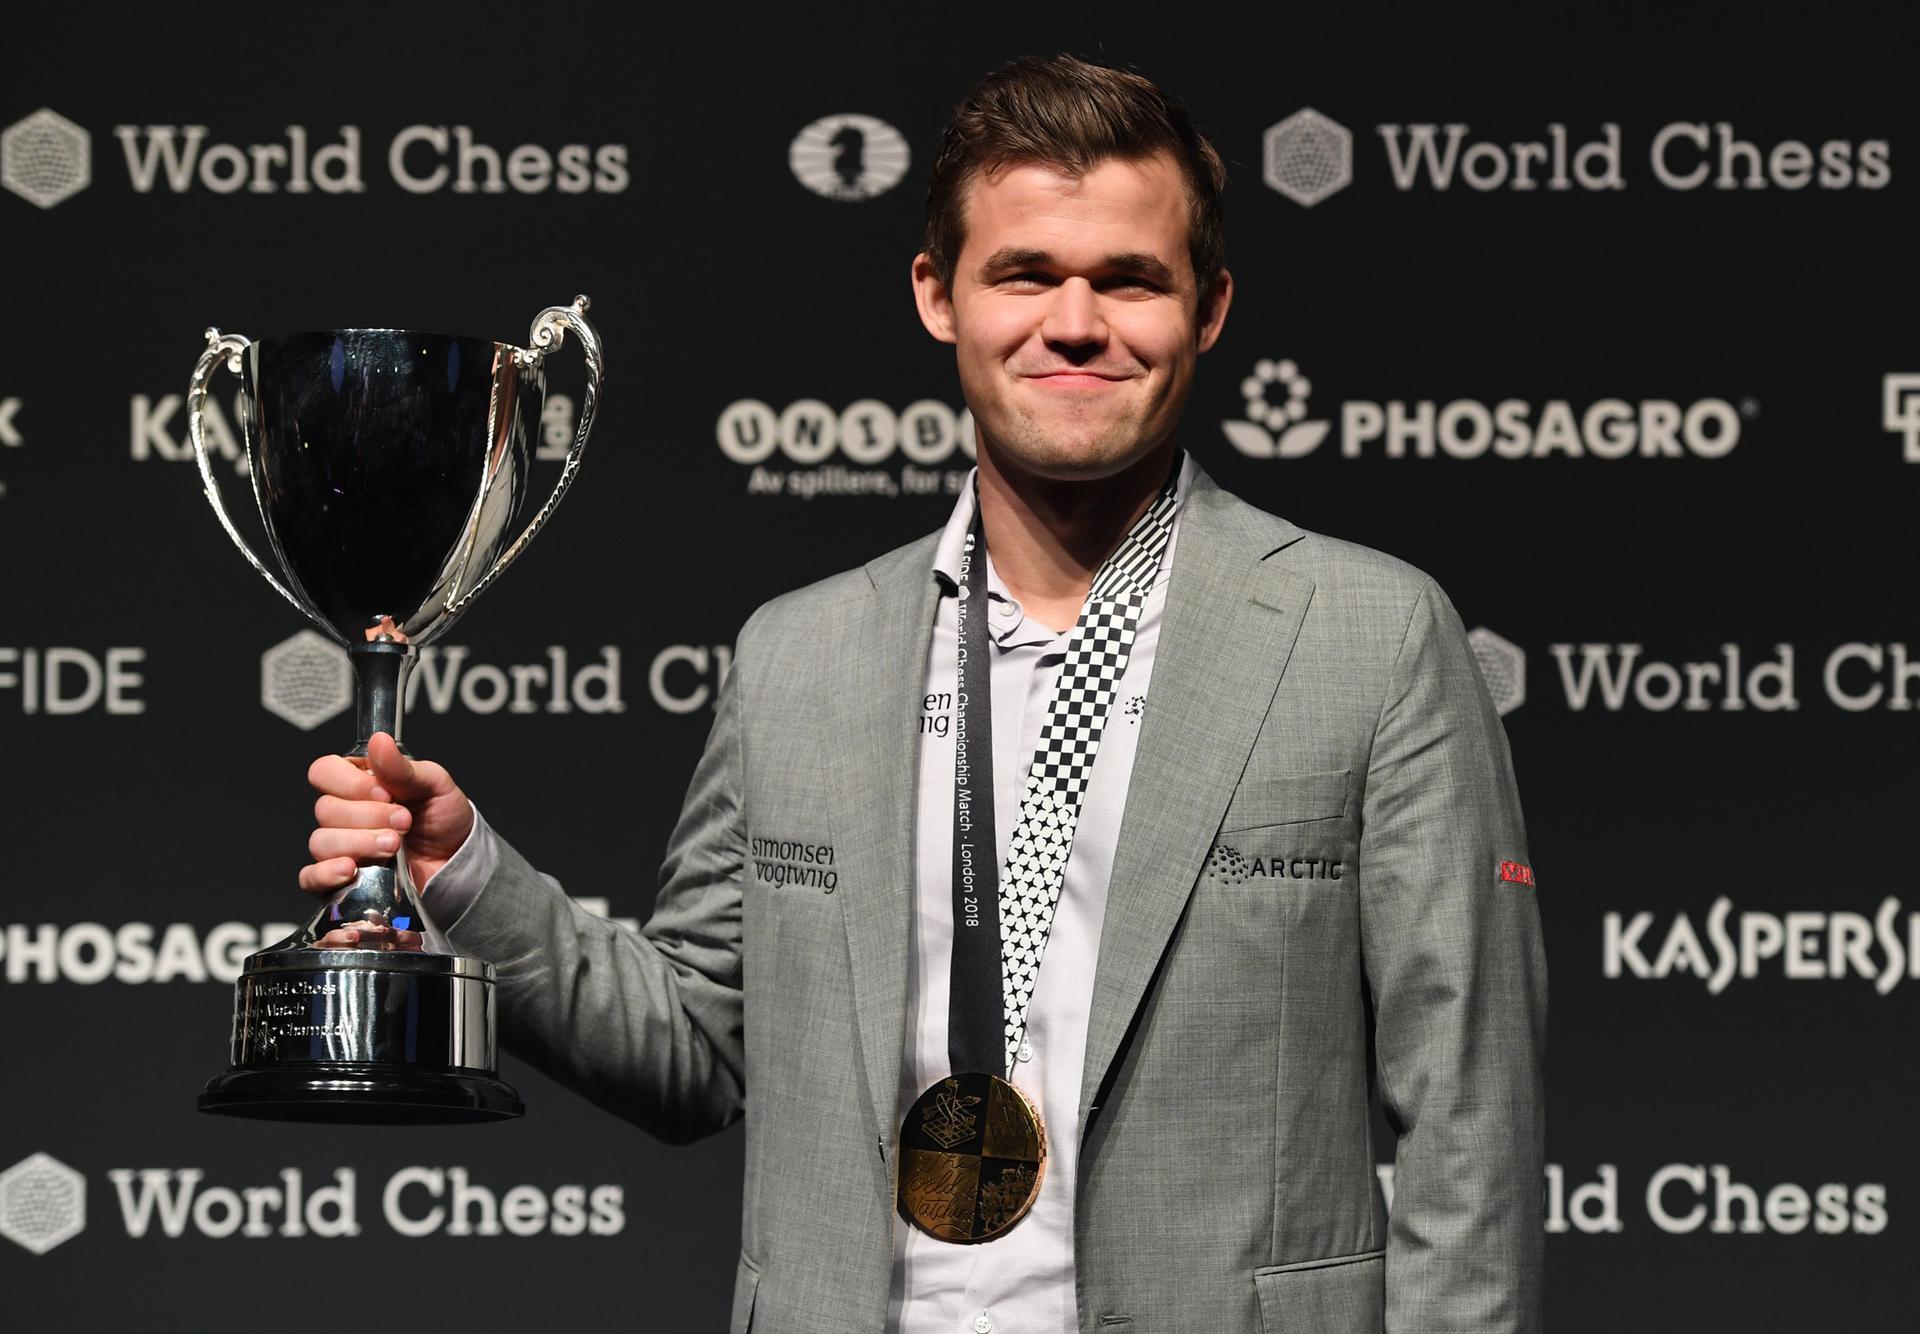 FIDE - International Chess Federation - April 2019 #FIDE #Rating List is  published. World Champion Magnus Carlsen keeps the top position in all  formats. Yifan Hou is the best among women in